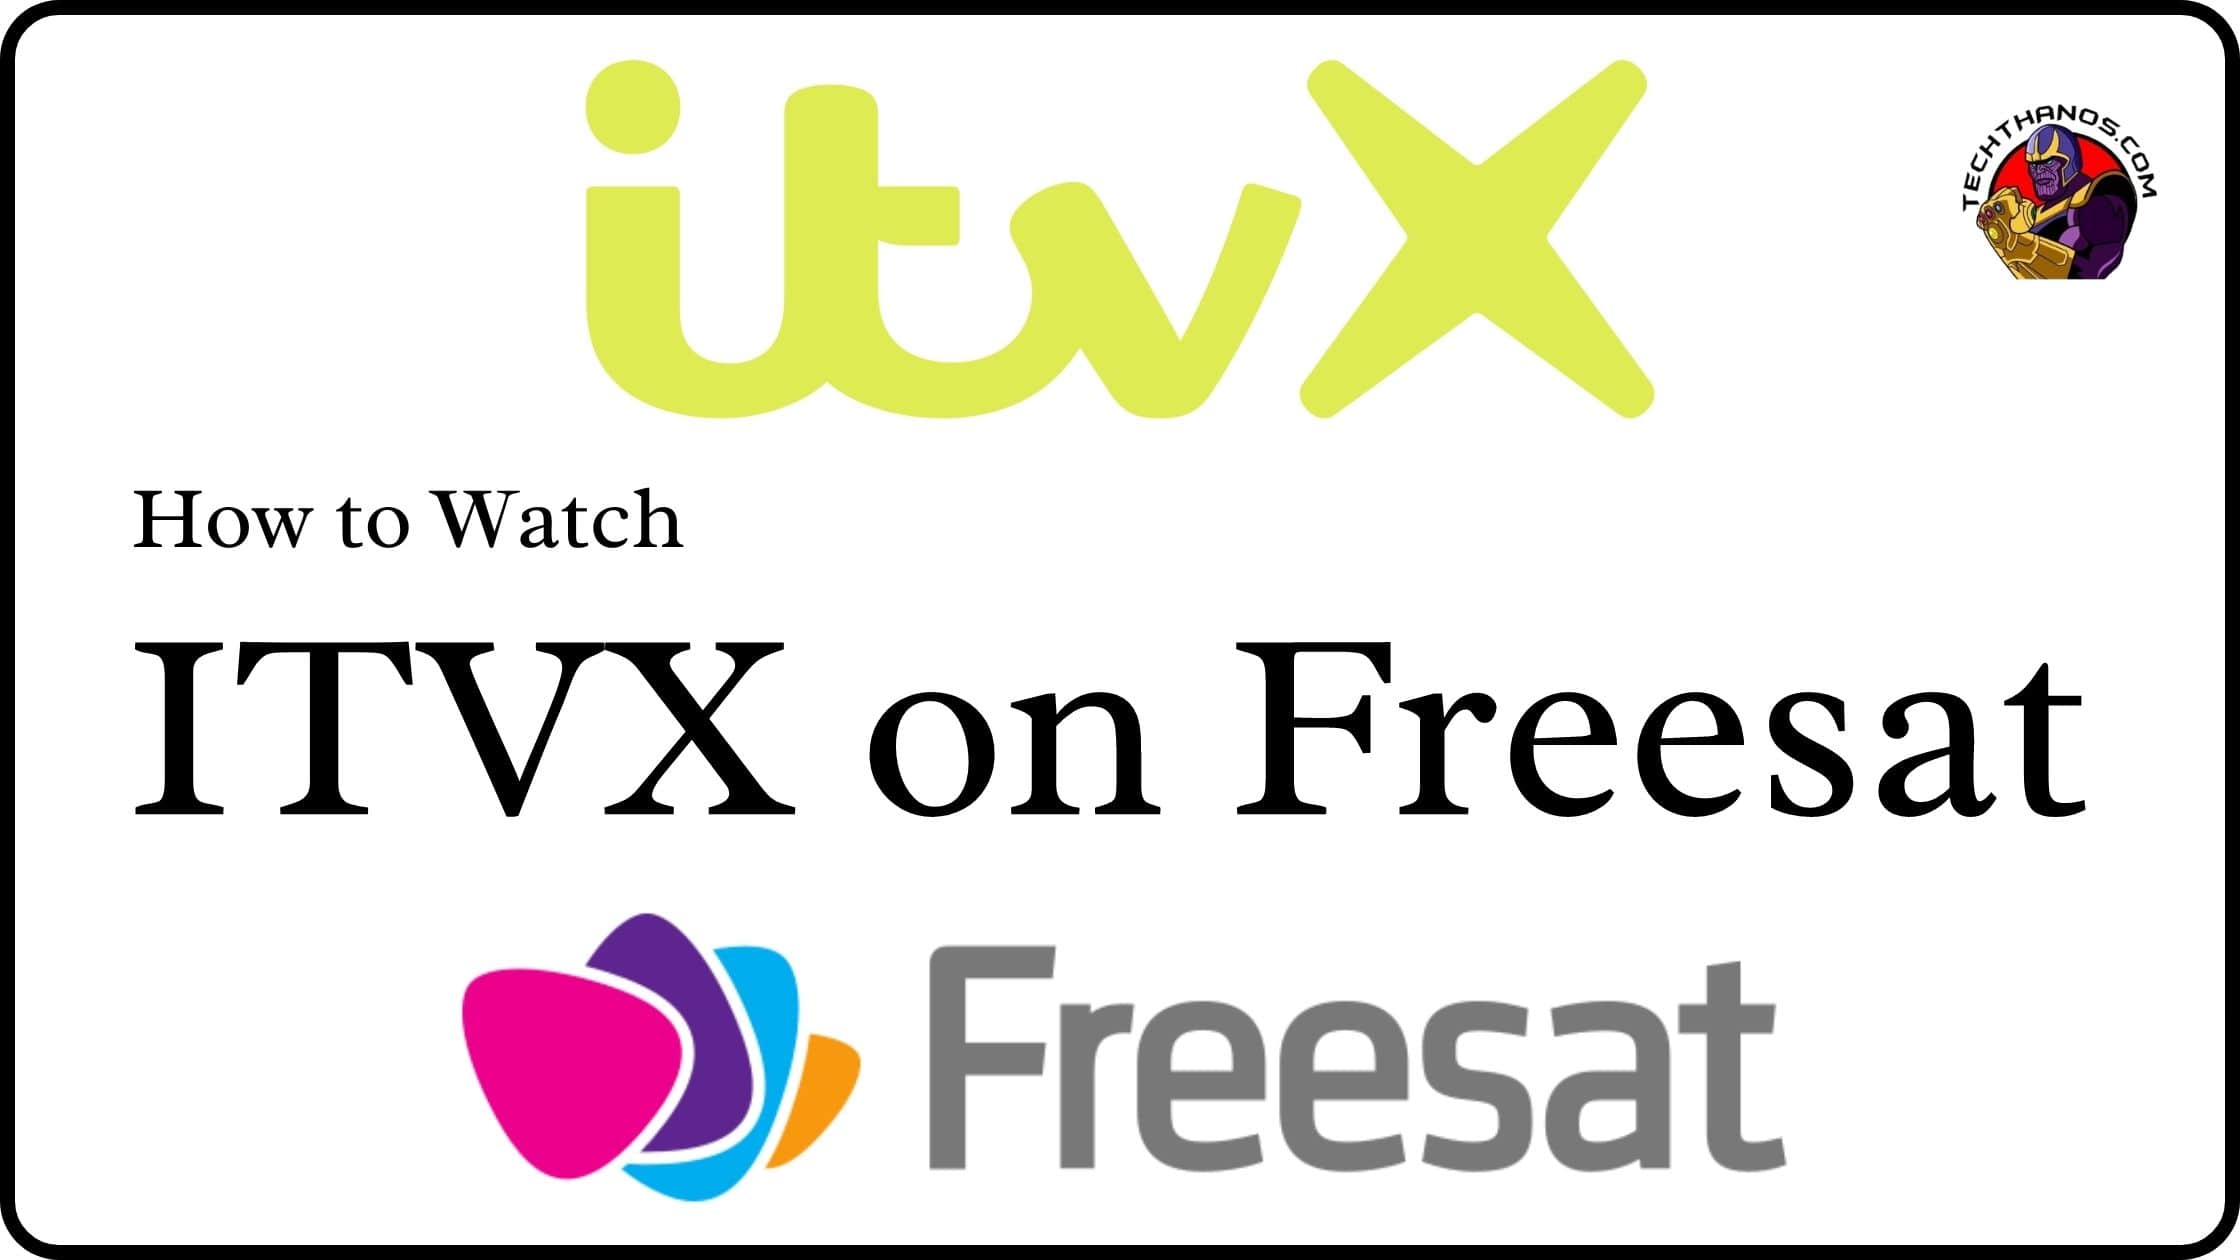 ITVX on Freesat How to watch?